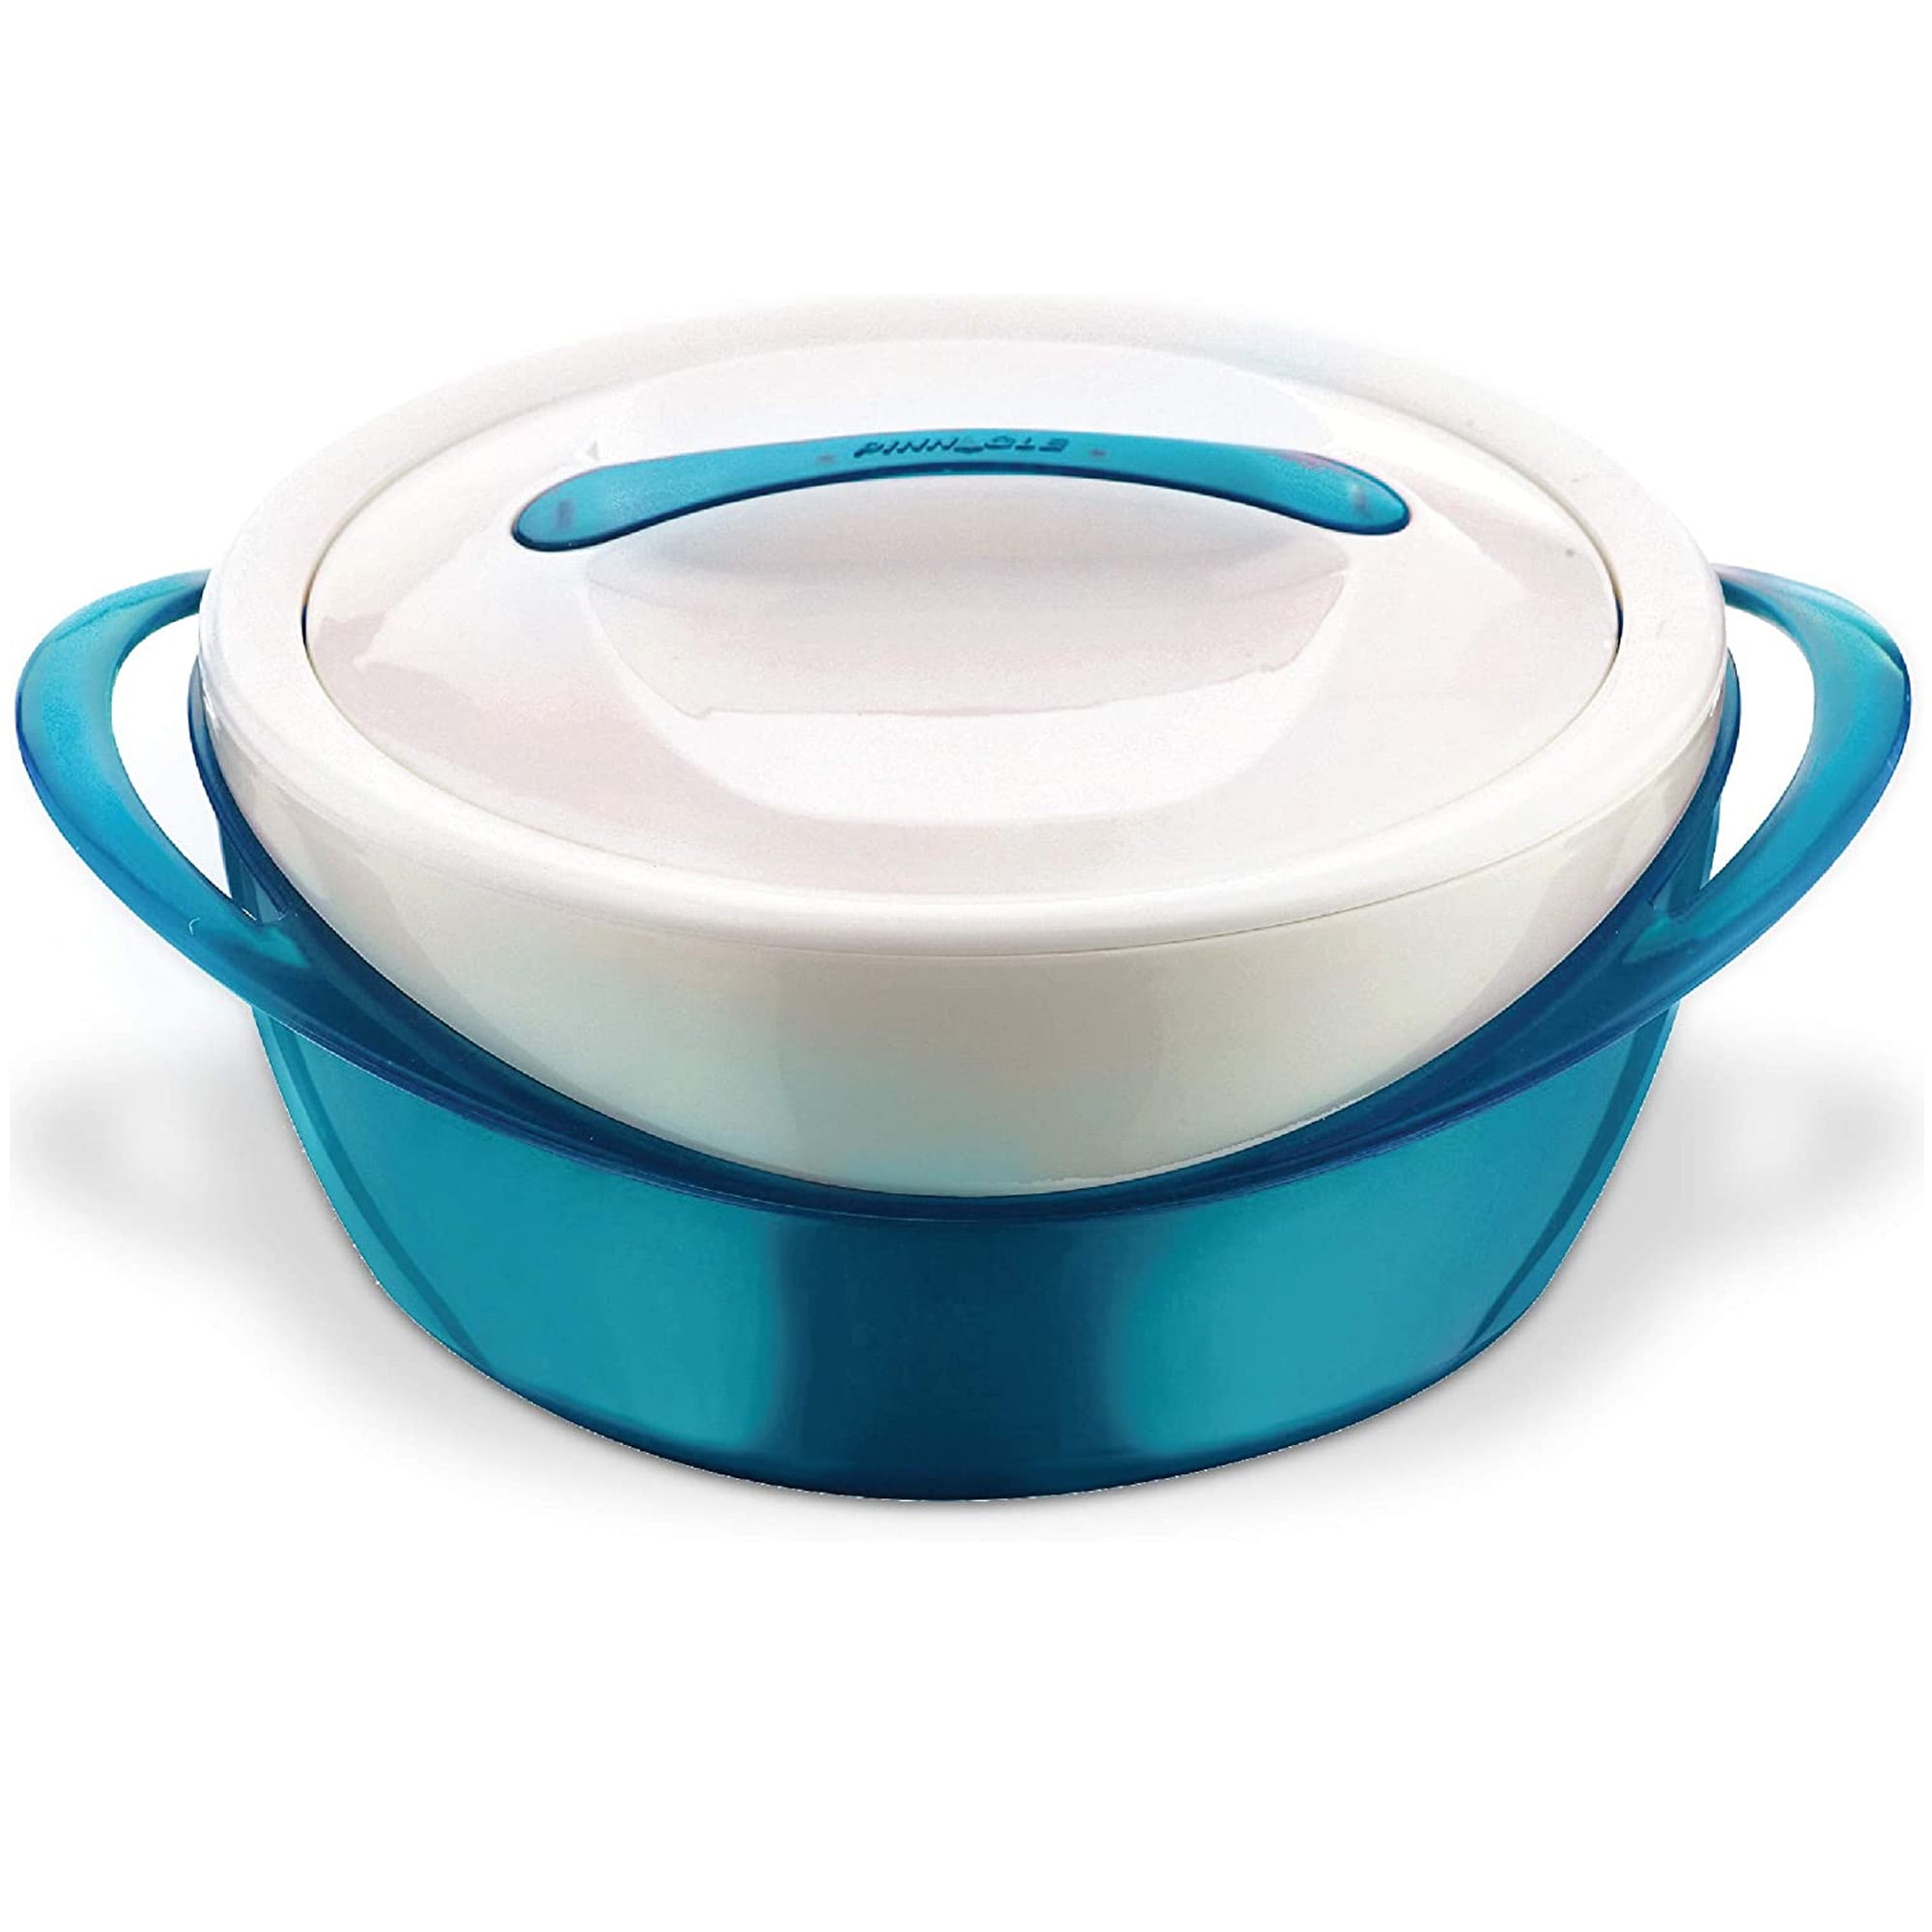 Plastic Insulated Bowls, 4 Turquoise and Brown Insulated Bowls